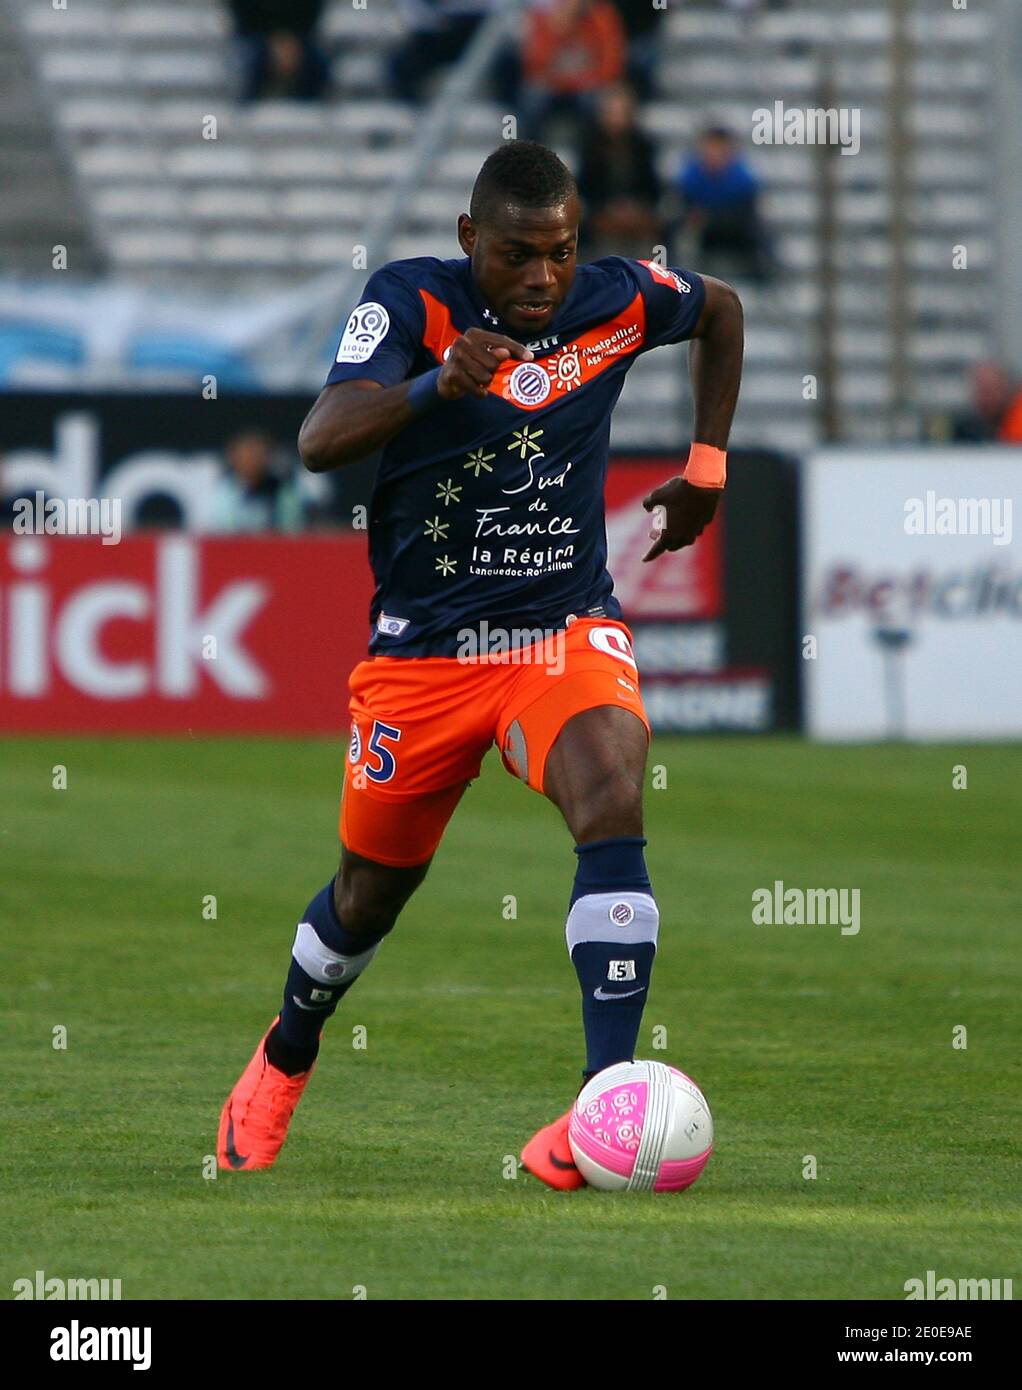 Montpellier's Henri Bedimo during the Ligue 1 soccer match OM vs Montpellier at the Velodrome Stadium in Marseille, south of France on April 11, 2012. Photo by Michel Clementz/ABACAPRESS.COM Stock Photo